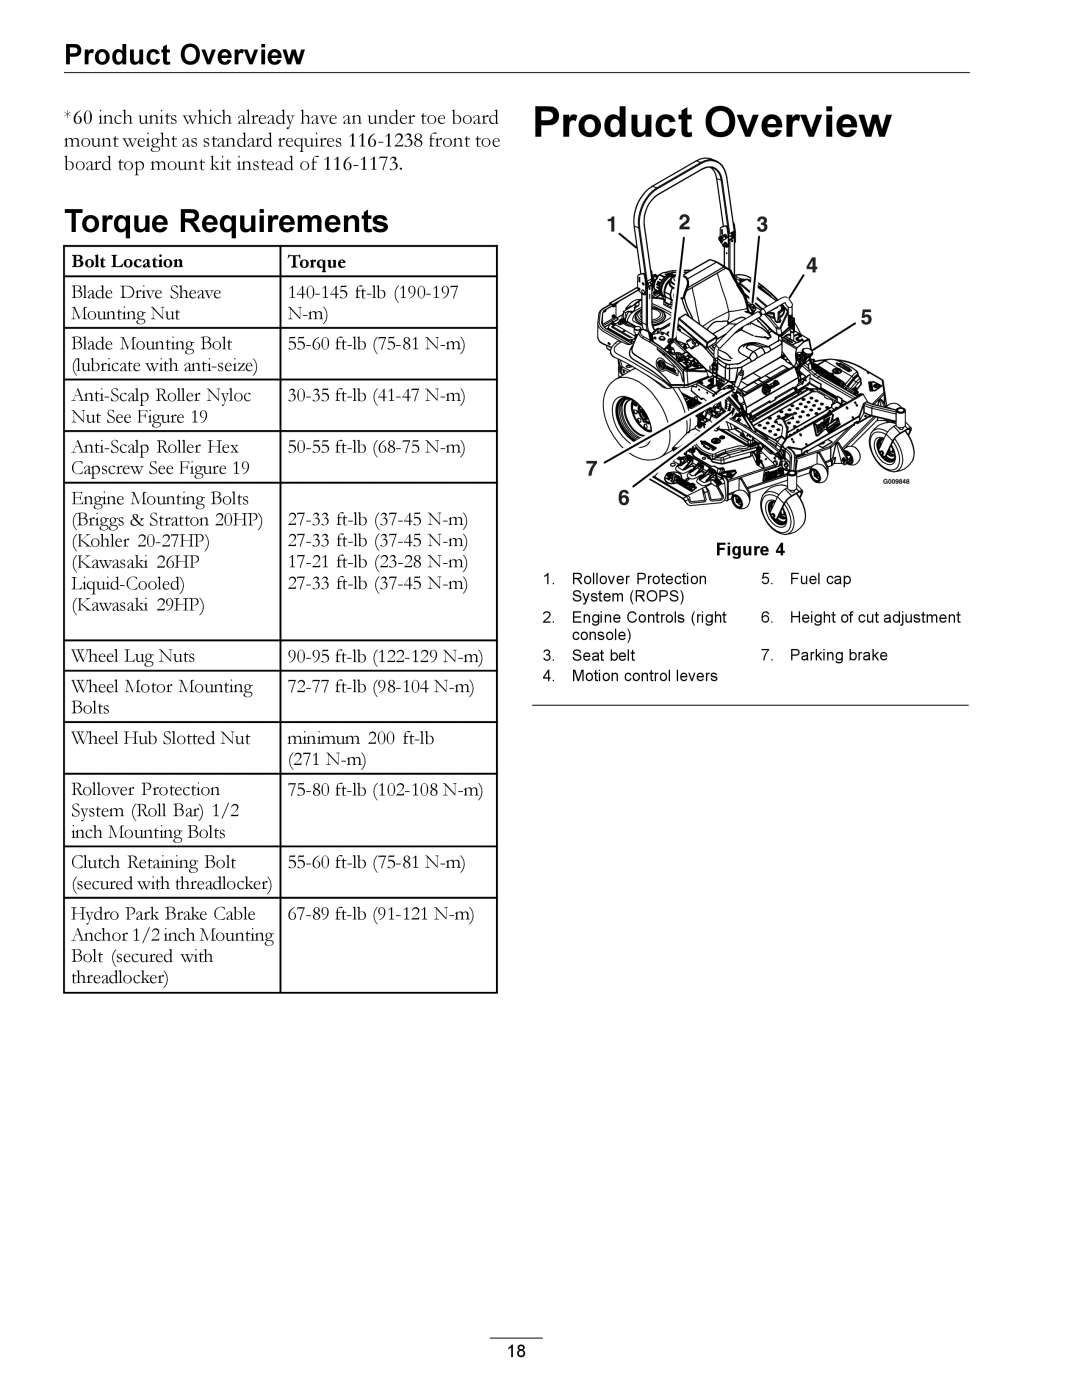 Exmark 4500-466 manual Product Overview, Torque Requirements 